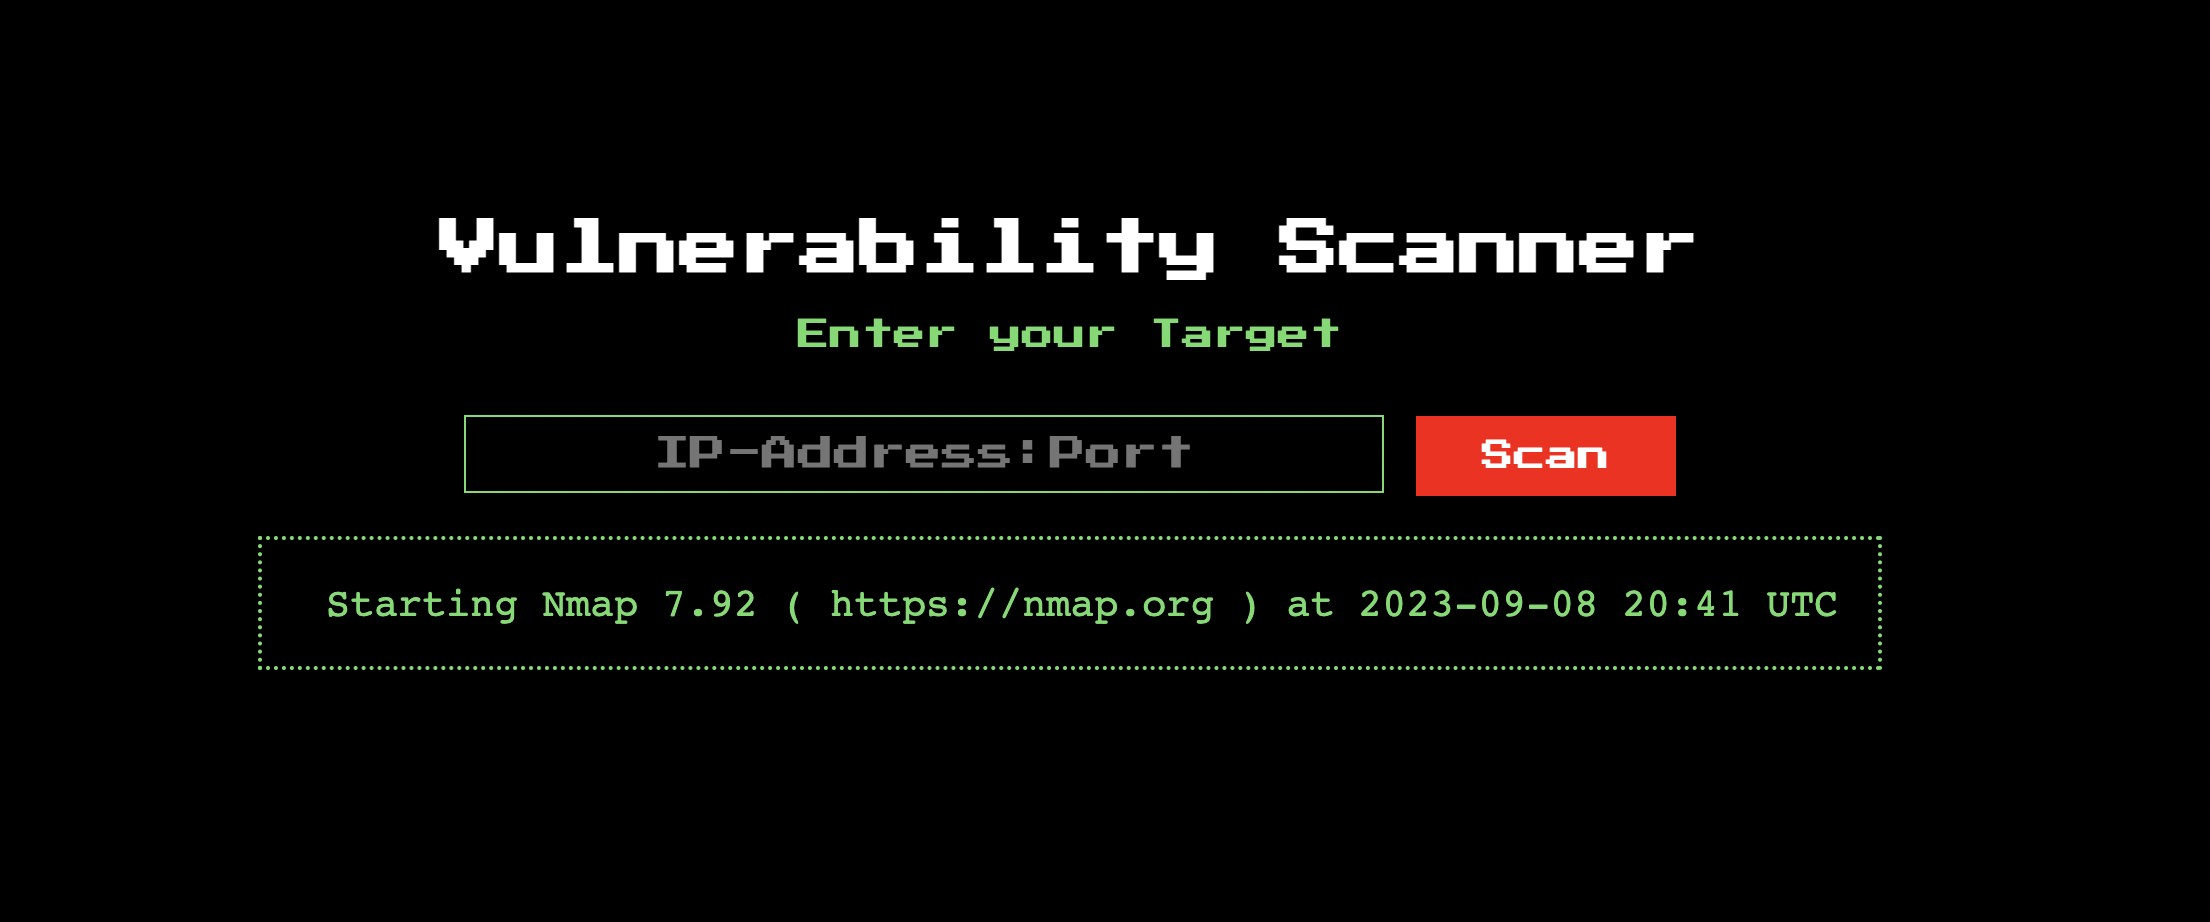 Image of the challenge website, showing just a starting nmap output and nothing else